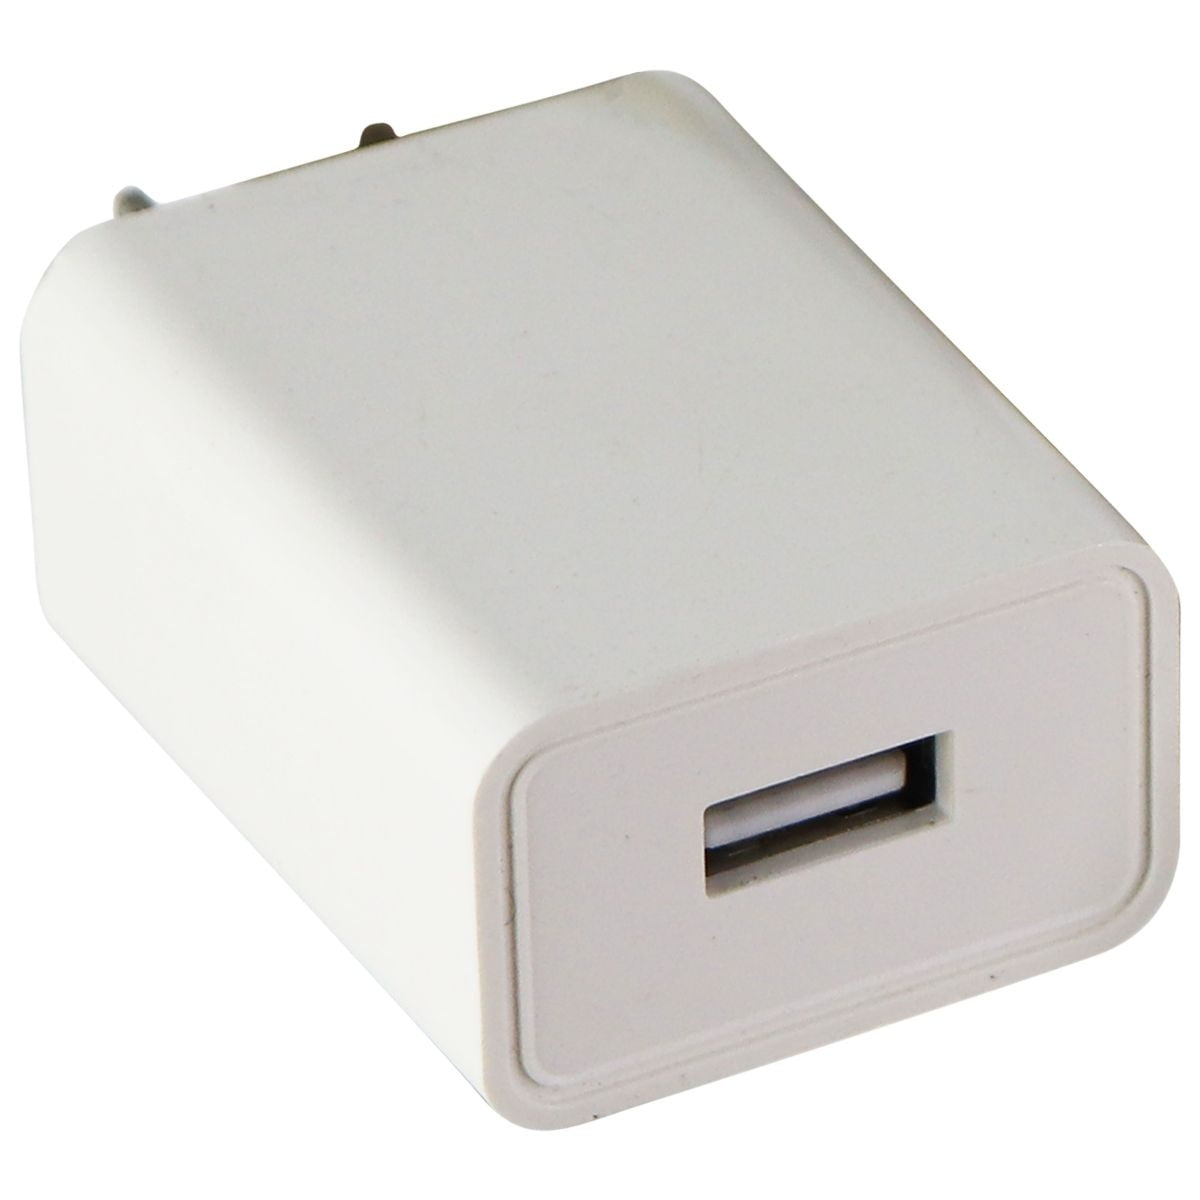 på trods af Recite Styring 5V/1.5A) Single USB Wall Charger Power Adapter - White (RWX-050150UU)  (Used) - Walmart.com